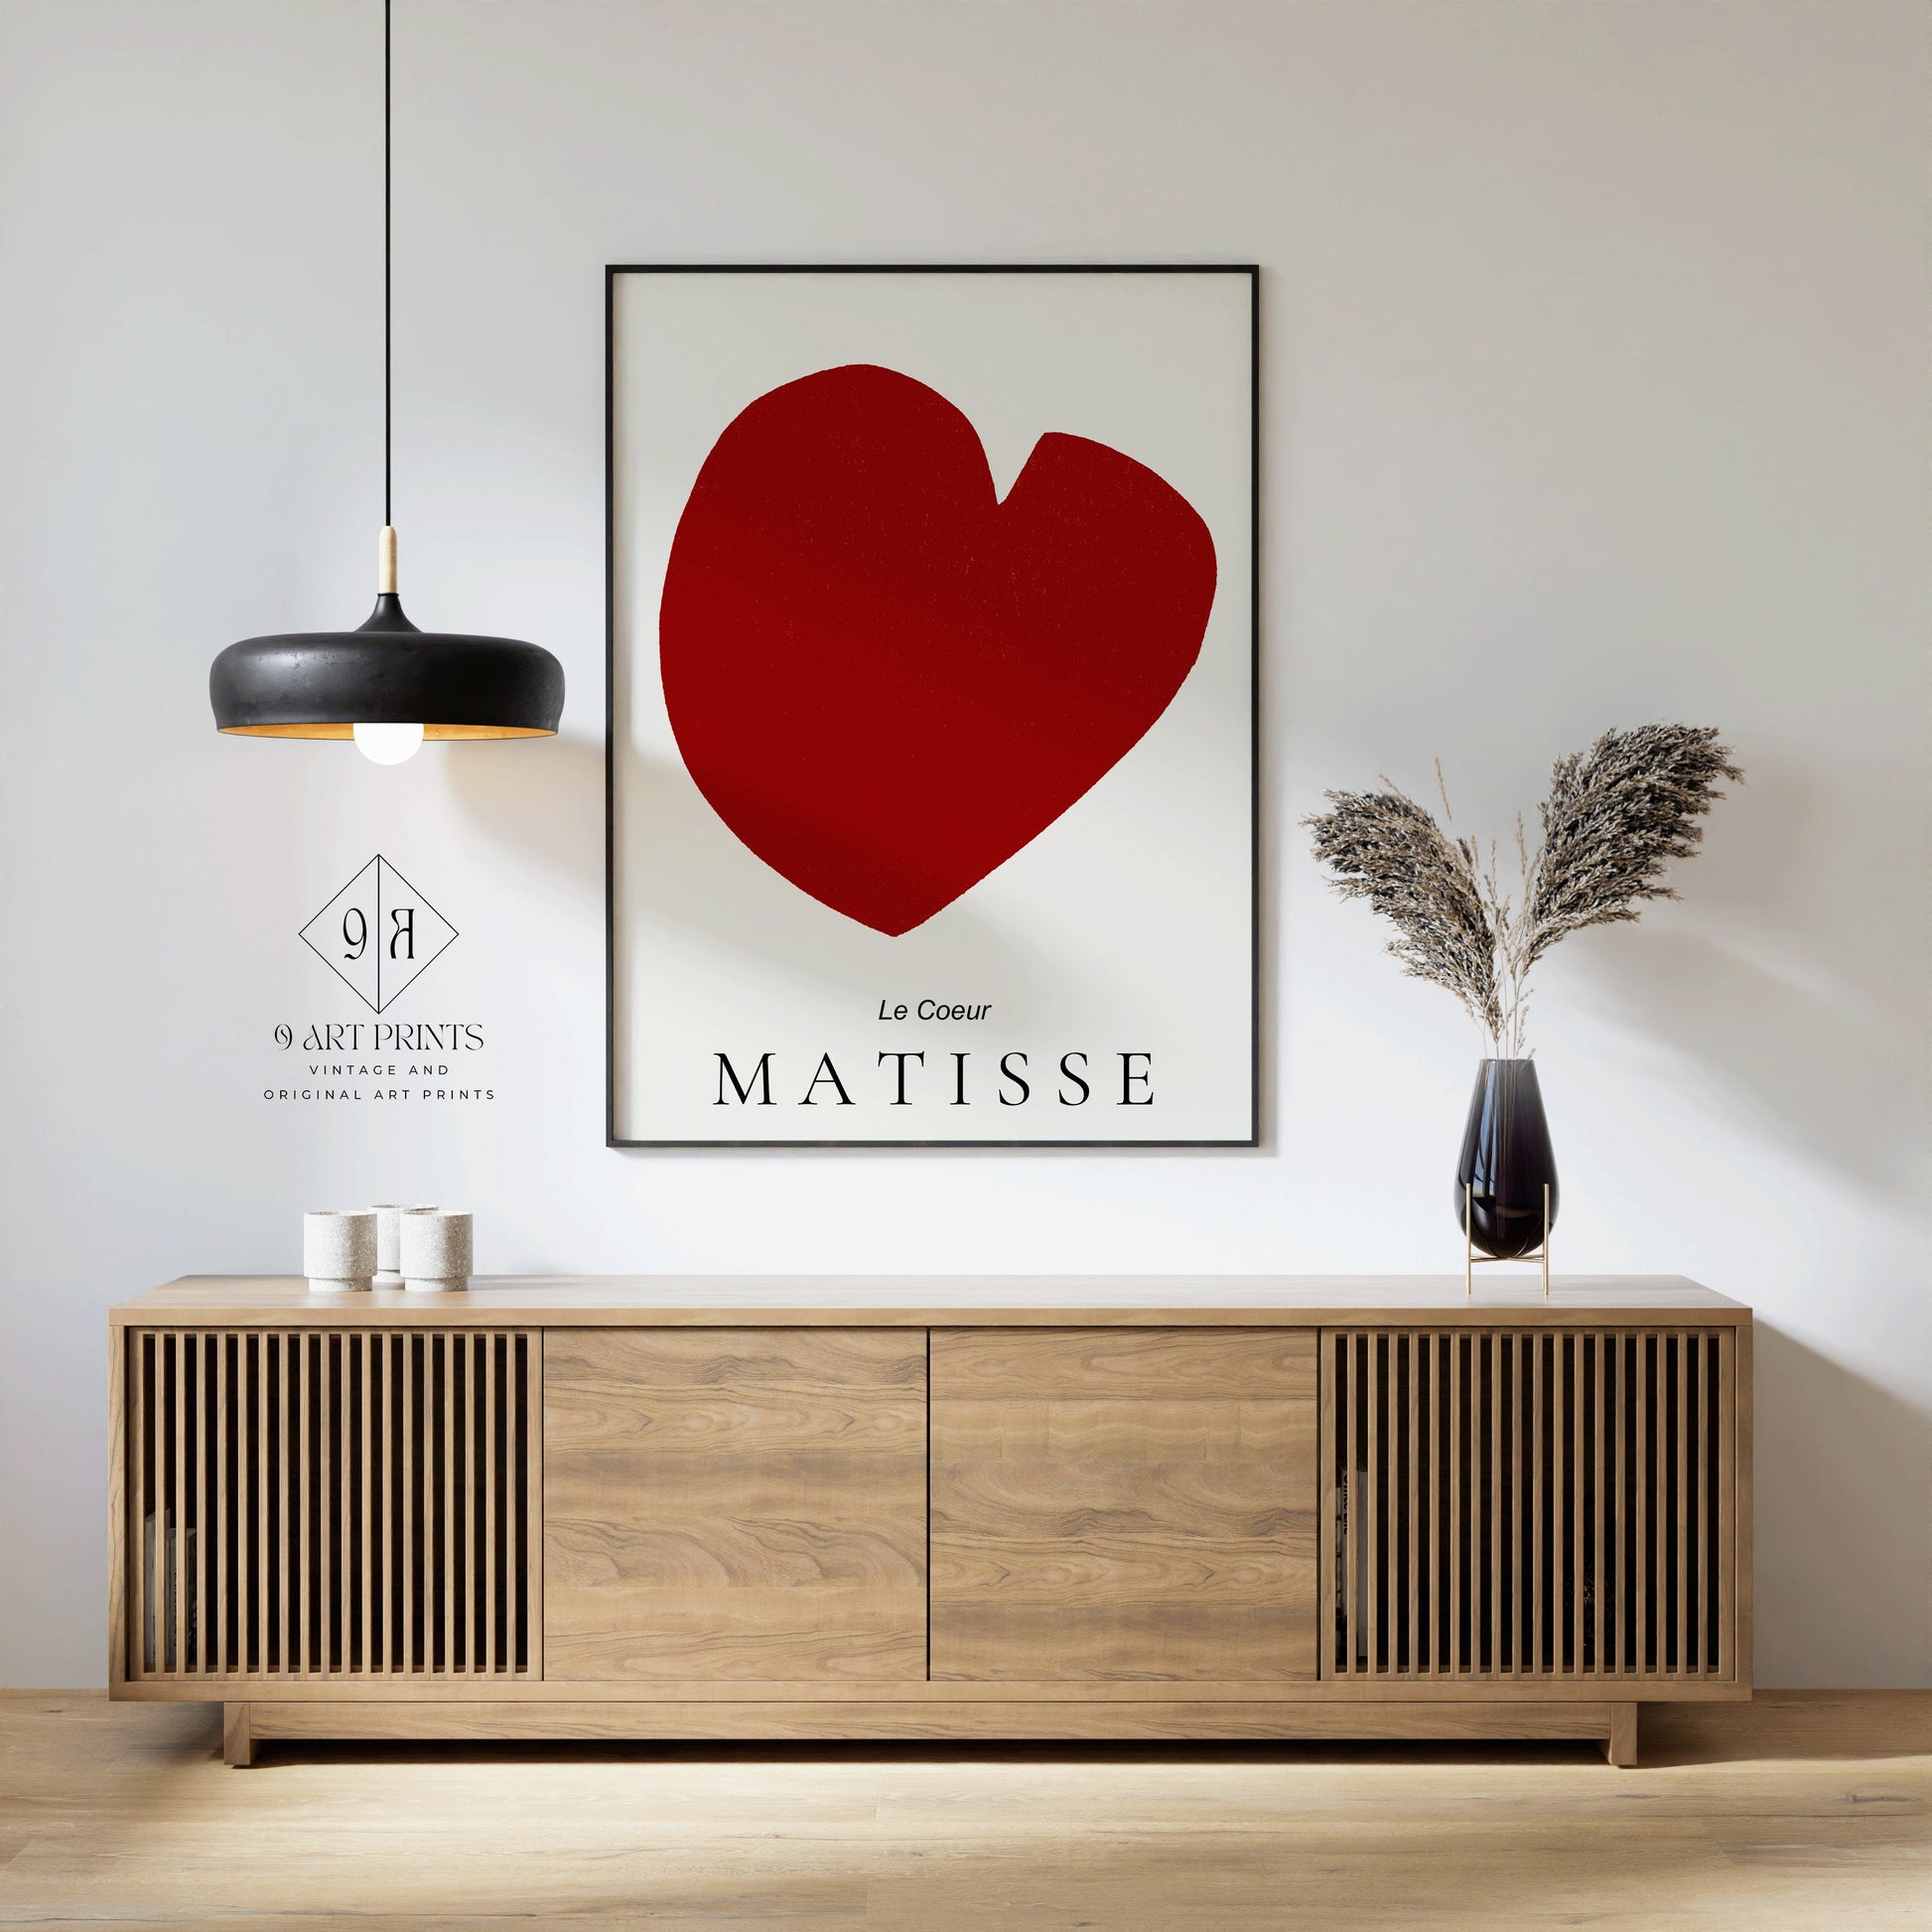 Framed Henri Matisse The Heart POSTER Red Minimalist Famous Art Print Retro Museum Ready to Hang Home Office Decor Gift Berggruen and Cie